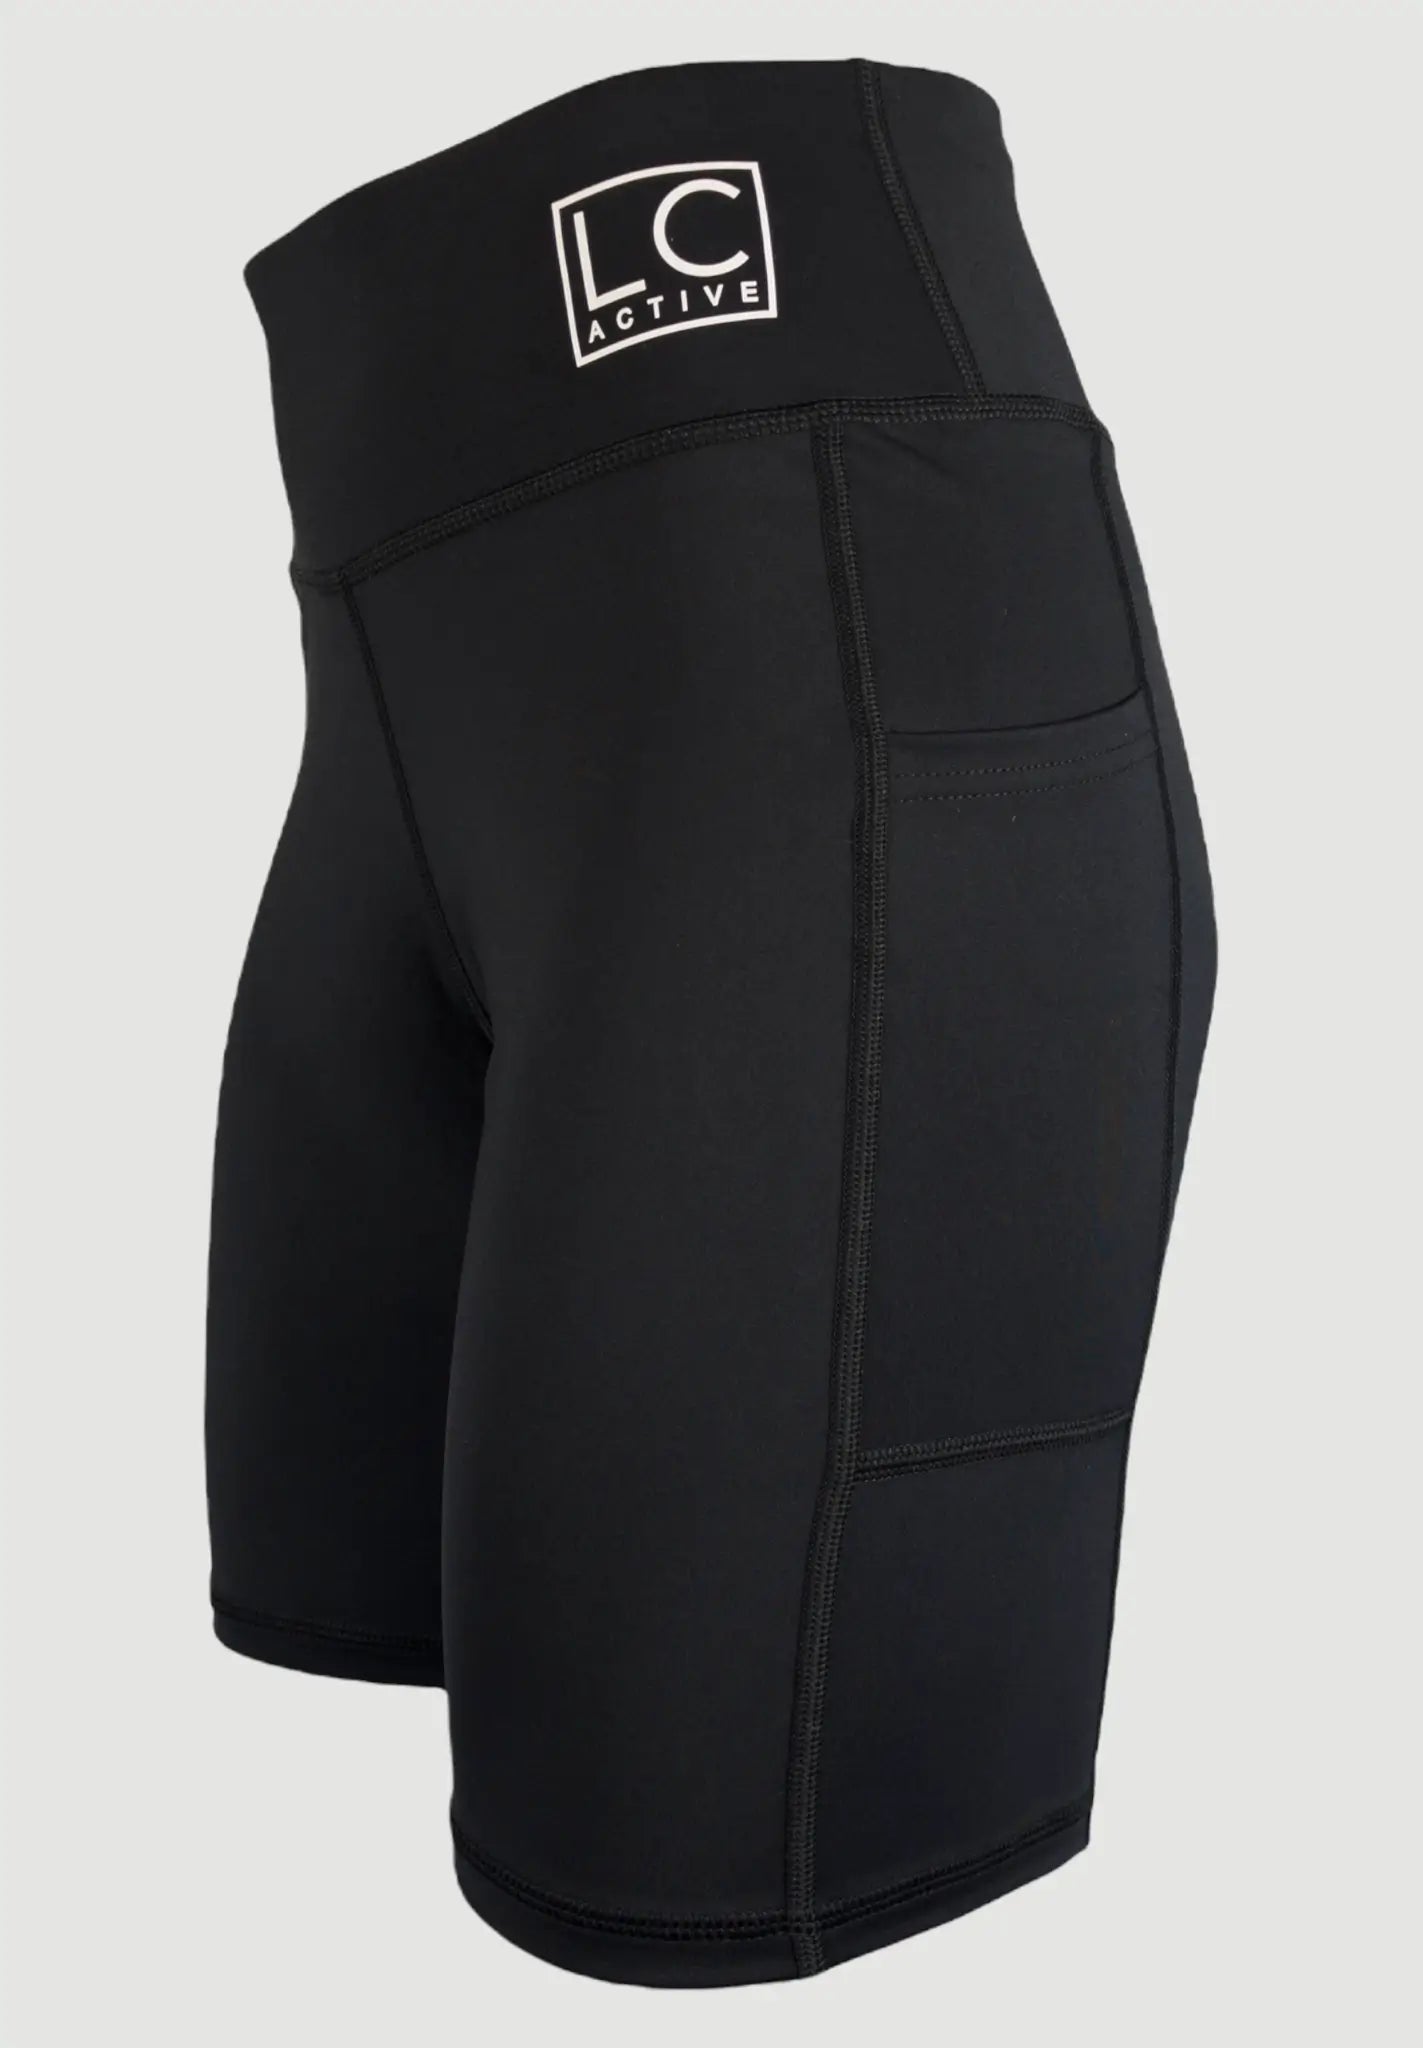 High-Waisted-Gym-shorts For-Women-black side pocket Leggings Signature LC-Active